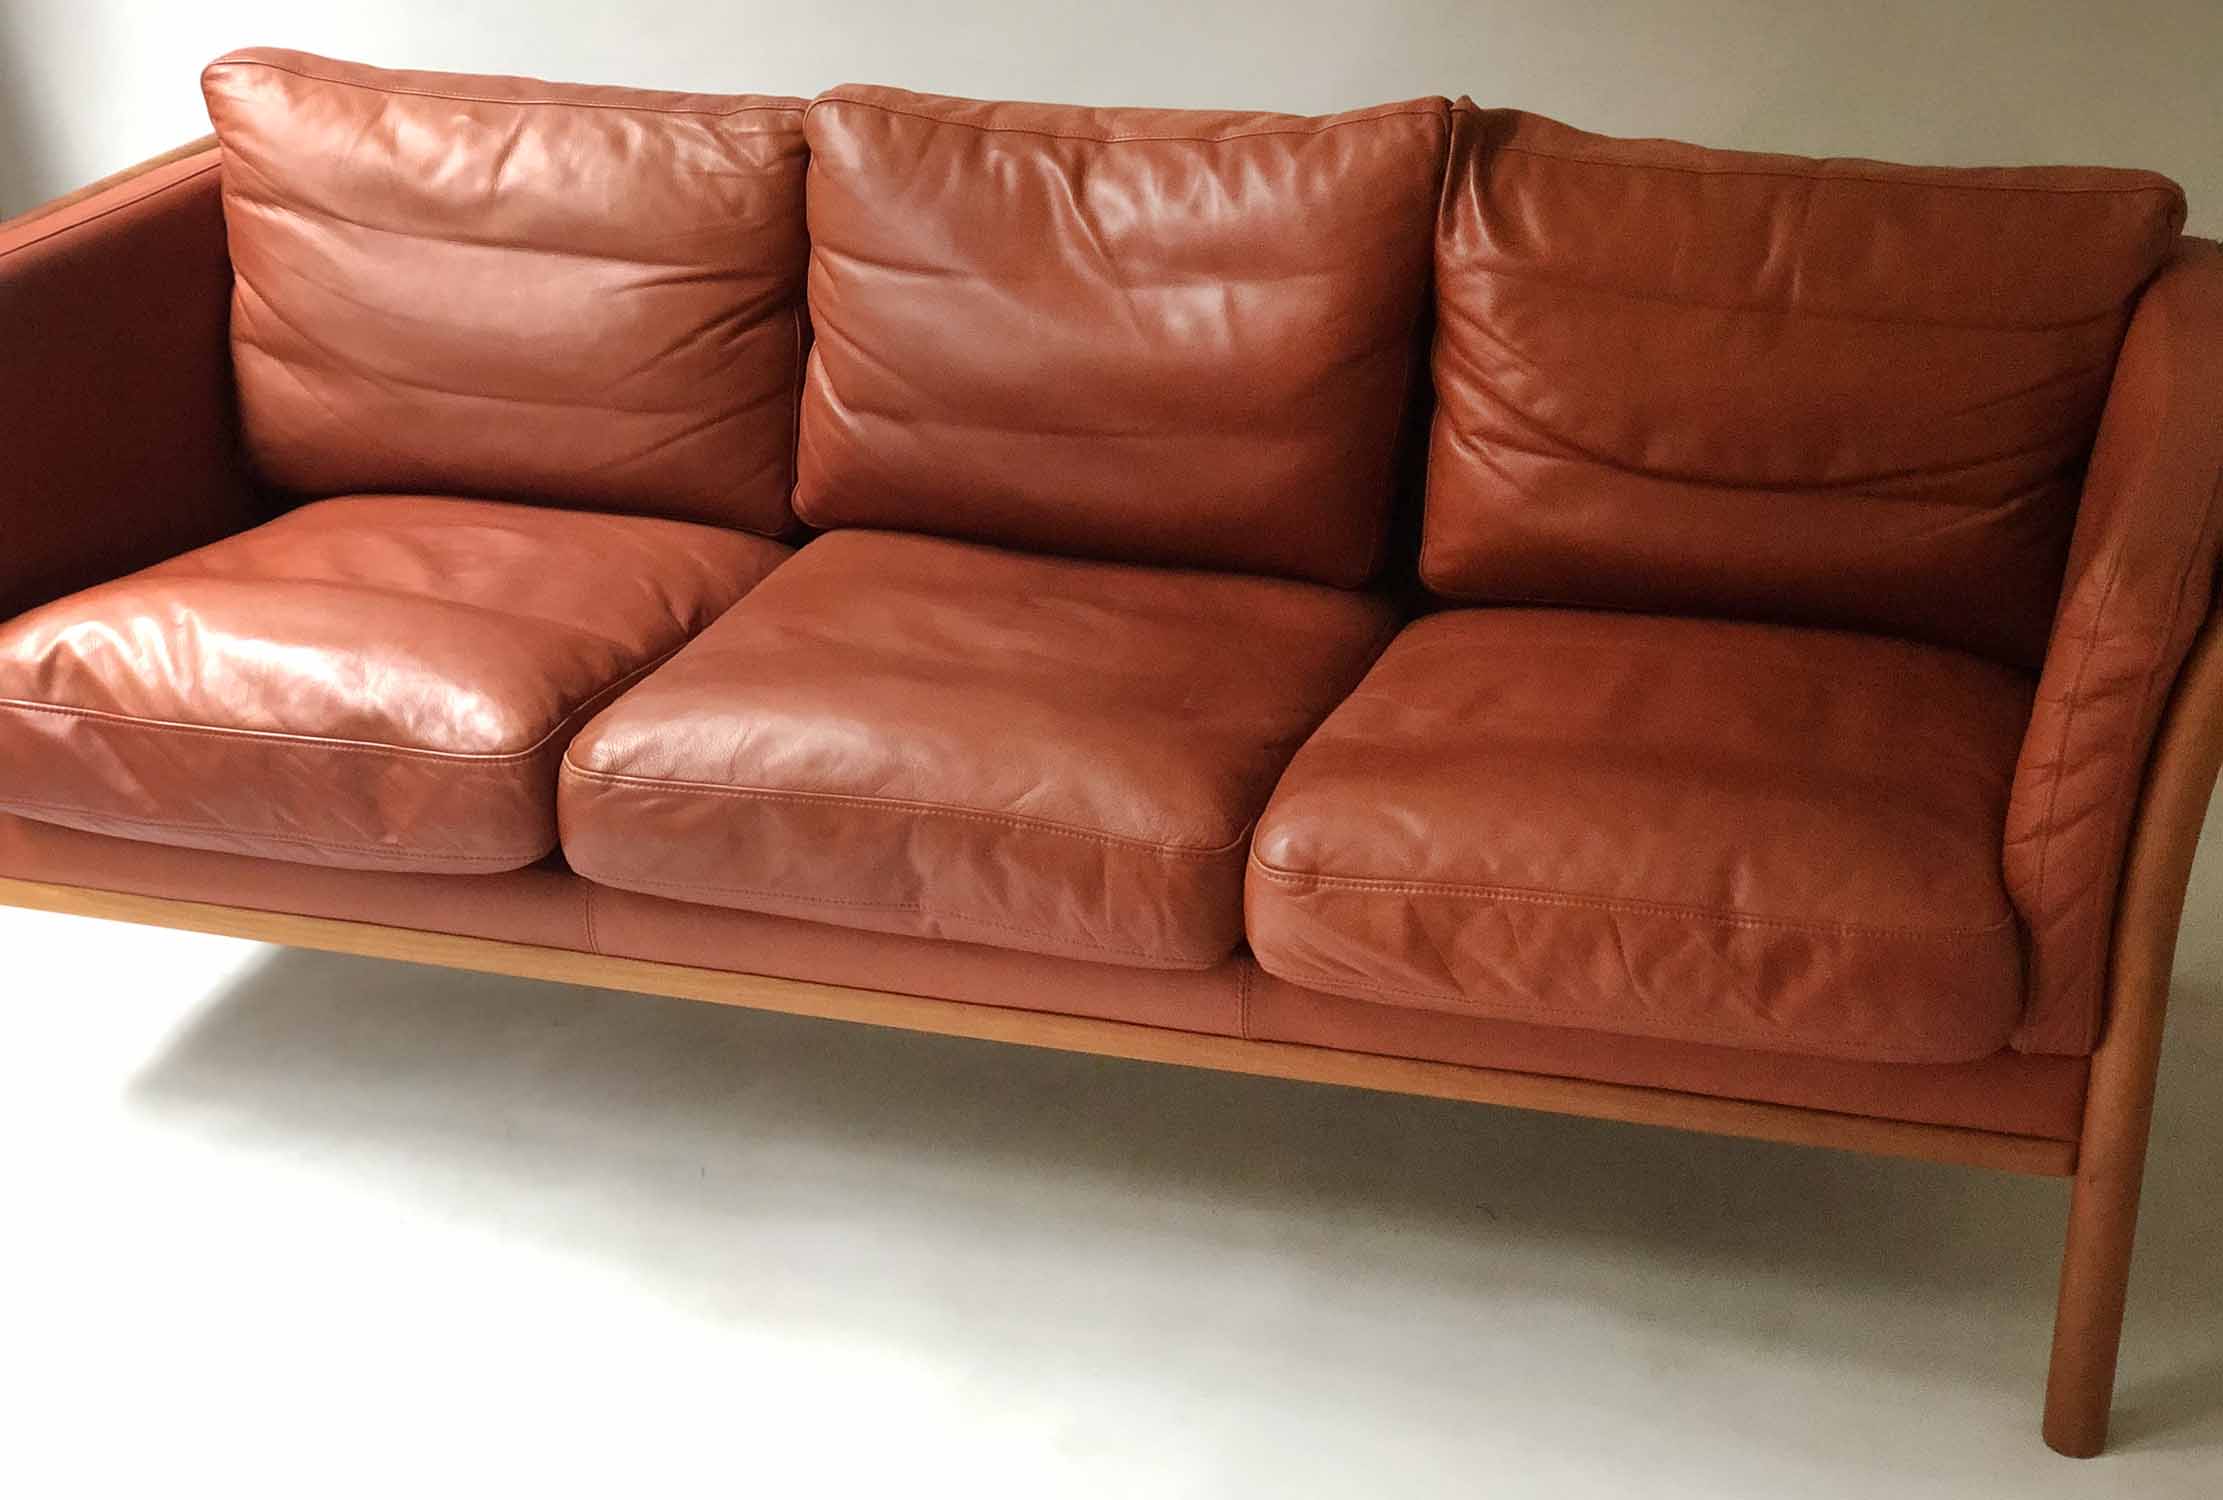 SOFA, mid 20th century Danish in hand finished grained mid brown leather with three seat cushions, - Image 3 of 4